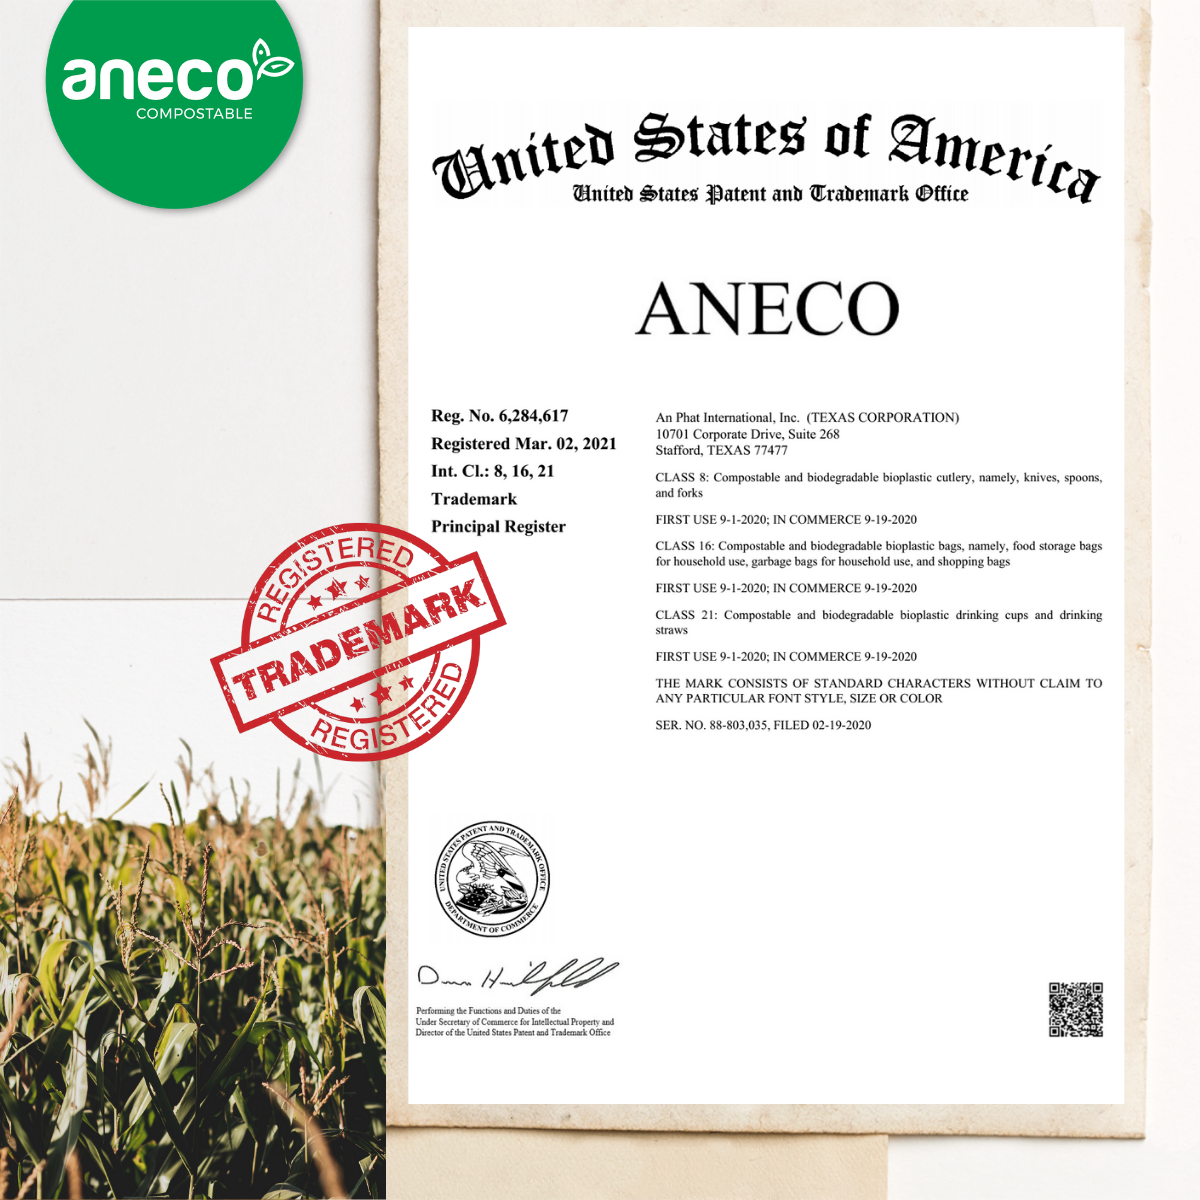 AnEco successfully applied for trademark in the United States